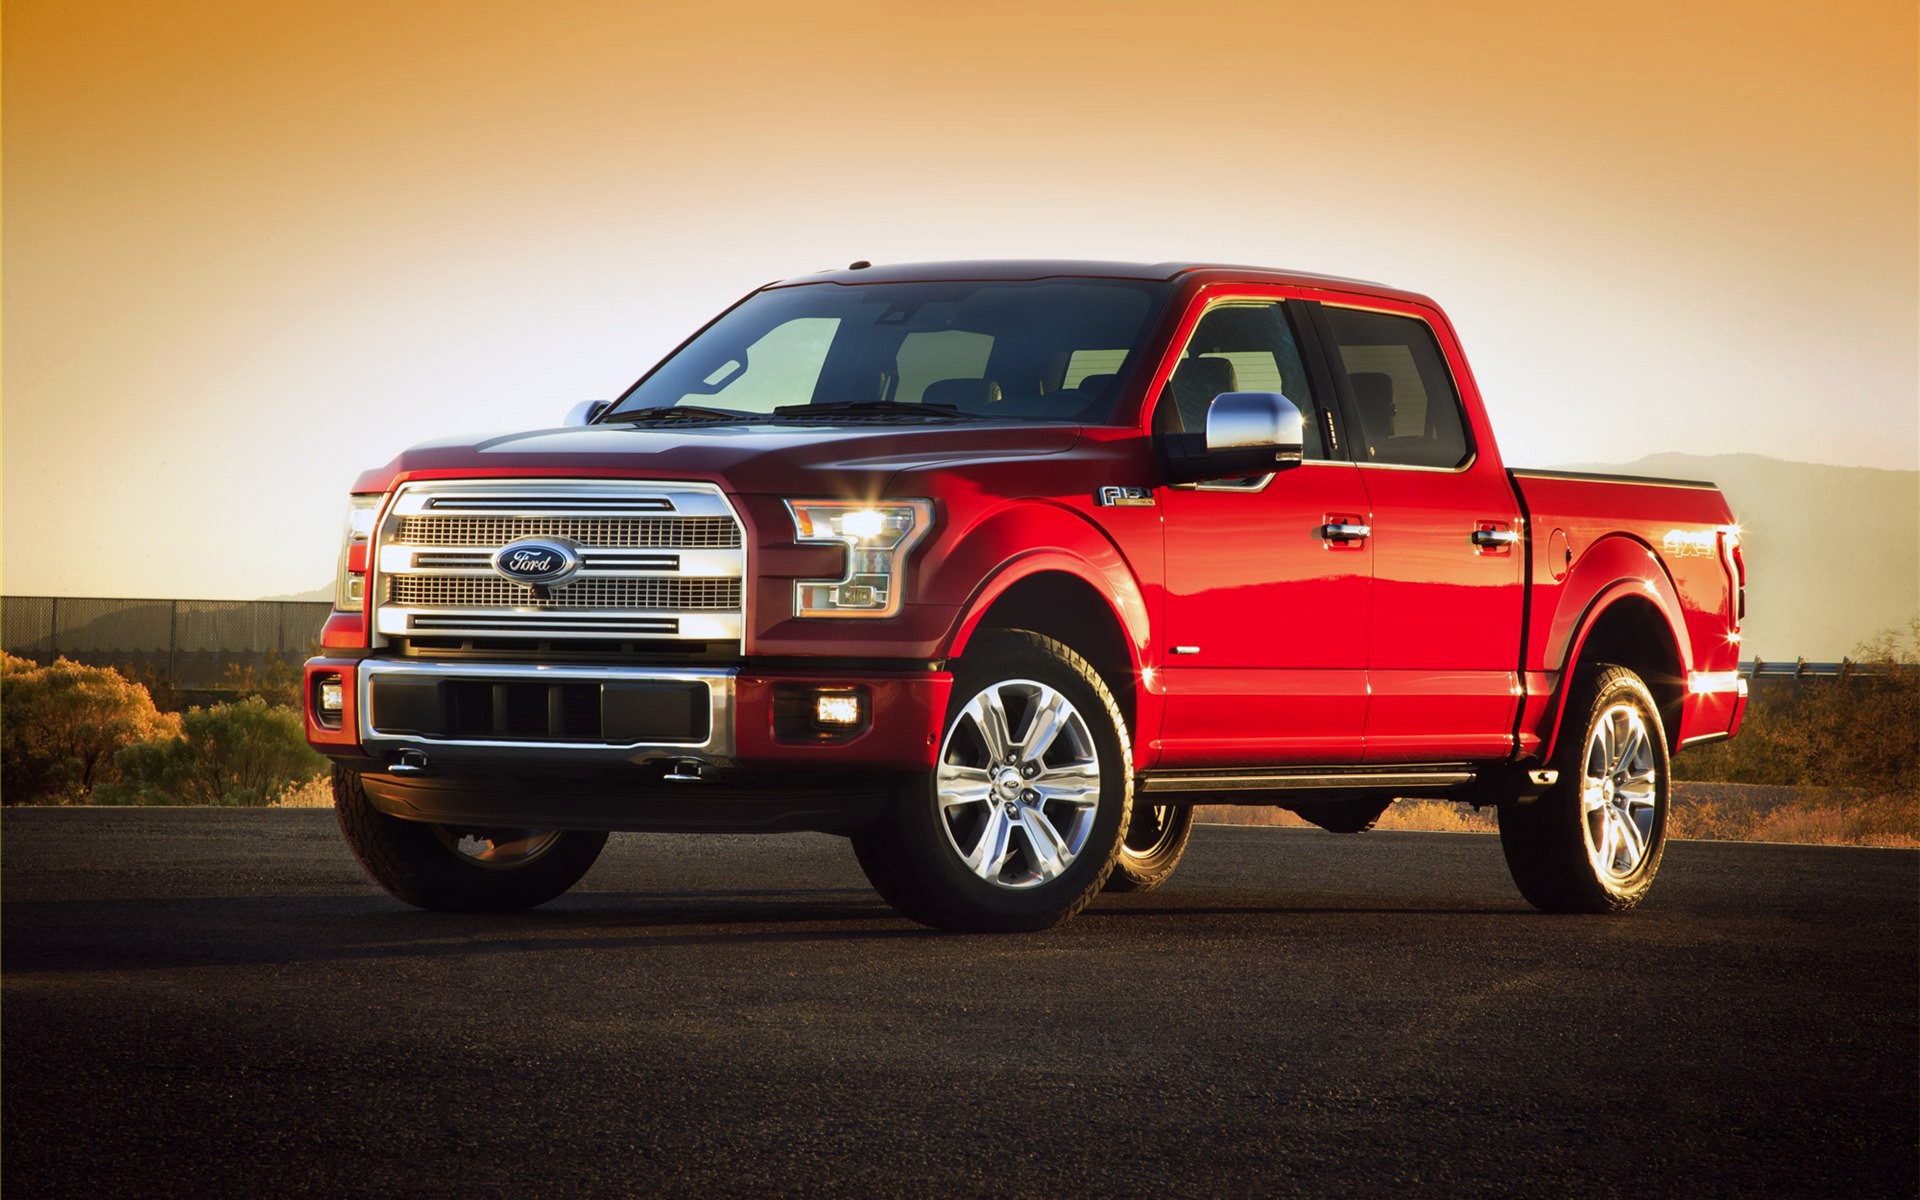 Ford Trucks Pickup Trucks Wallpapers Hd Desktop And Mobile Backgrounds